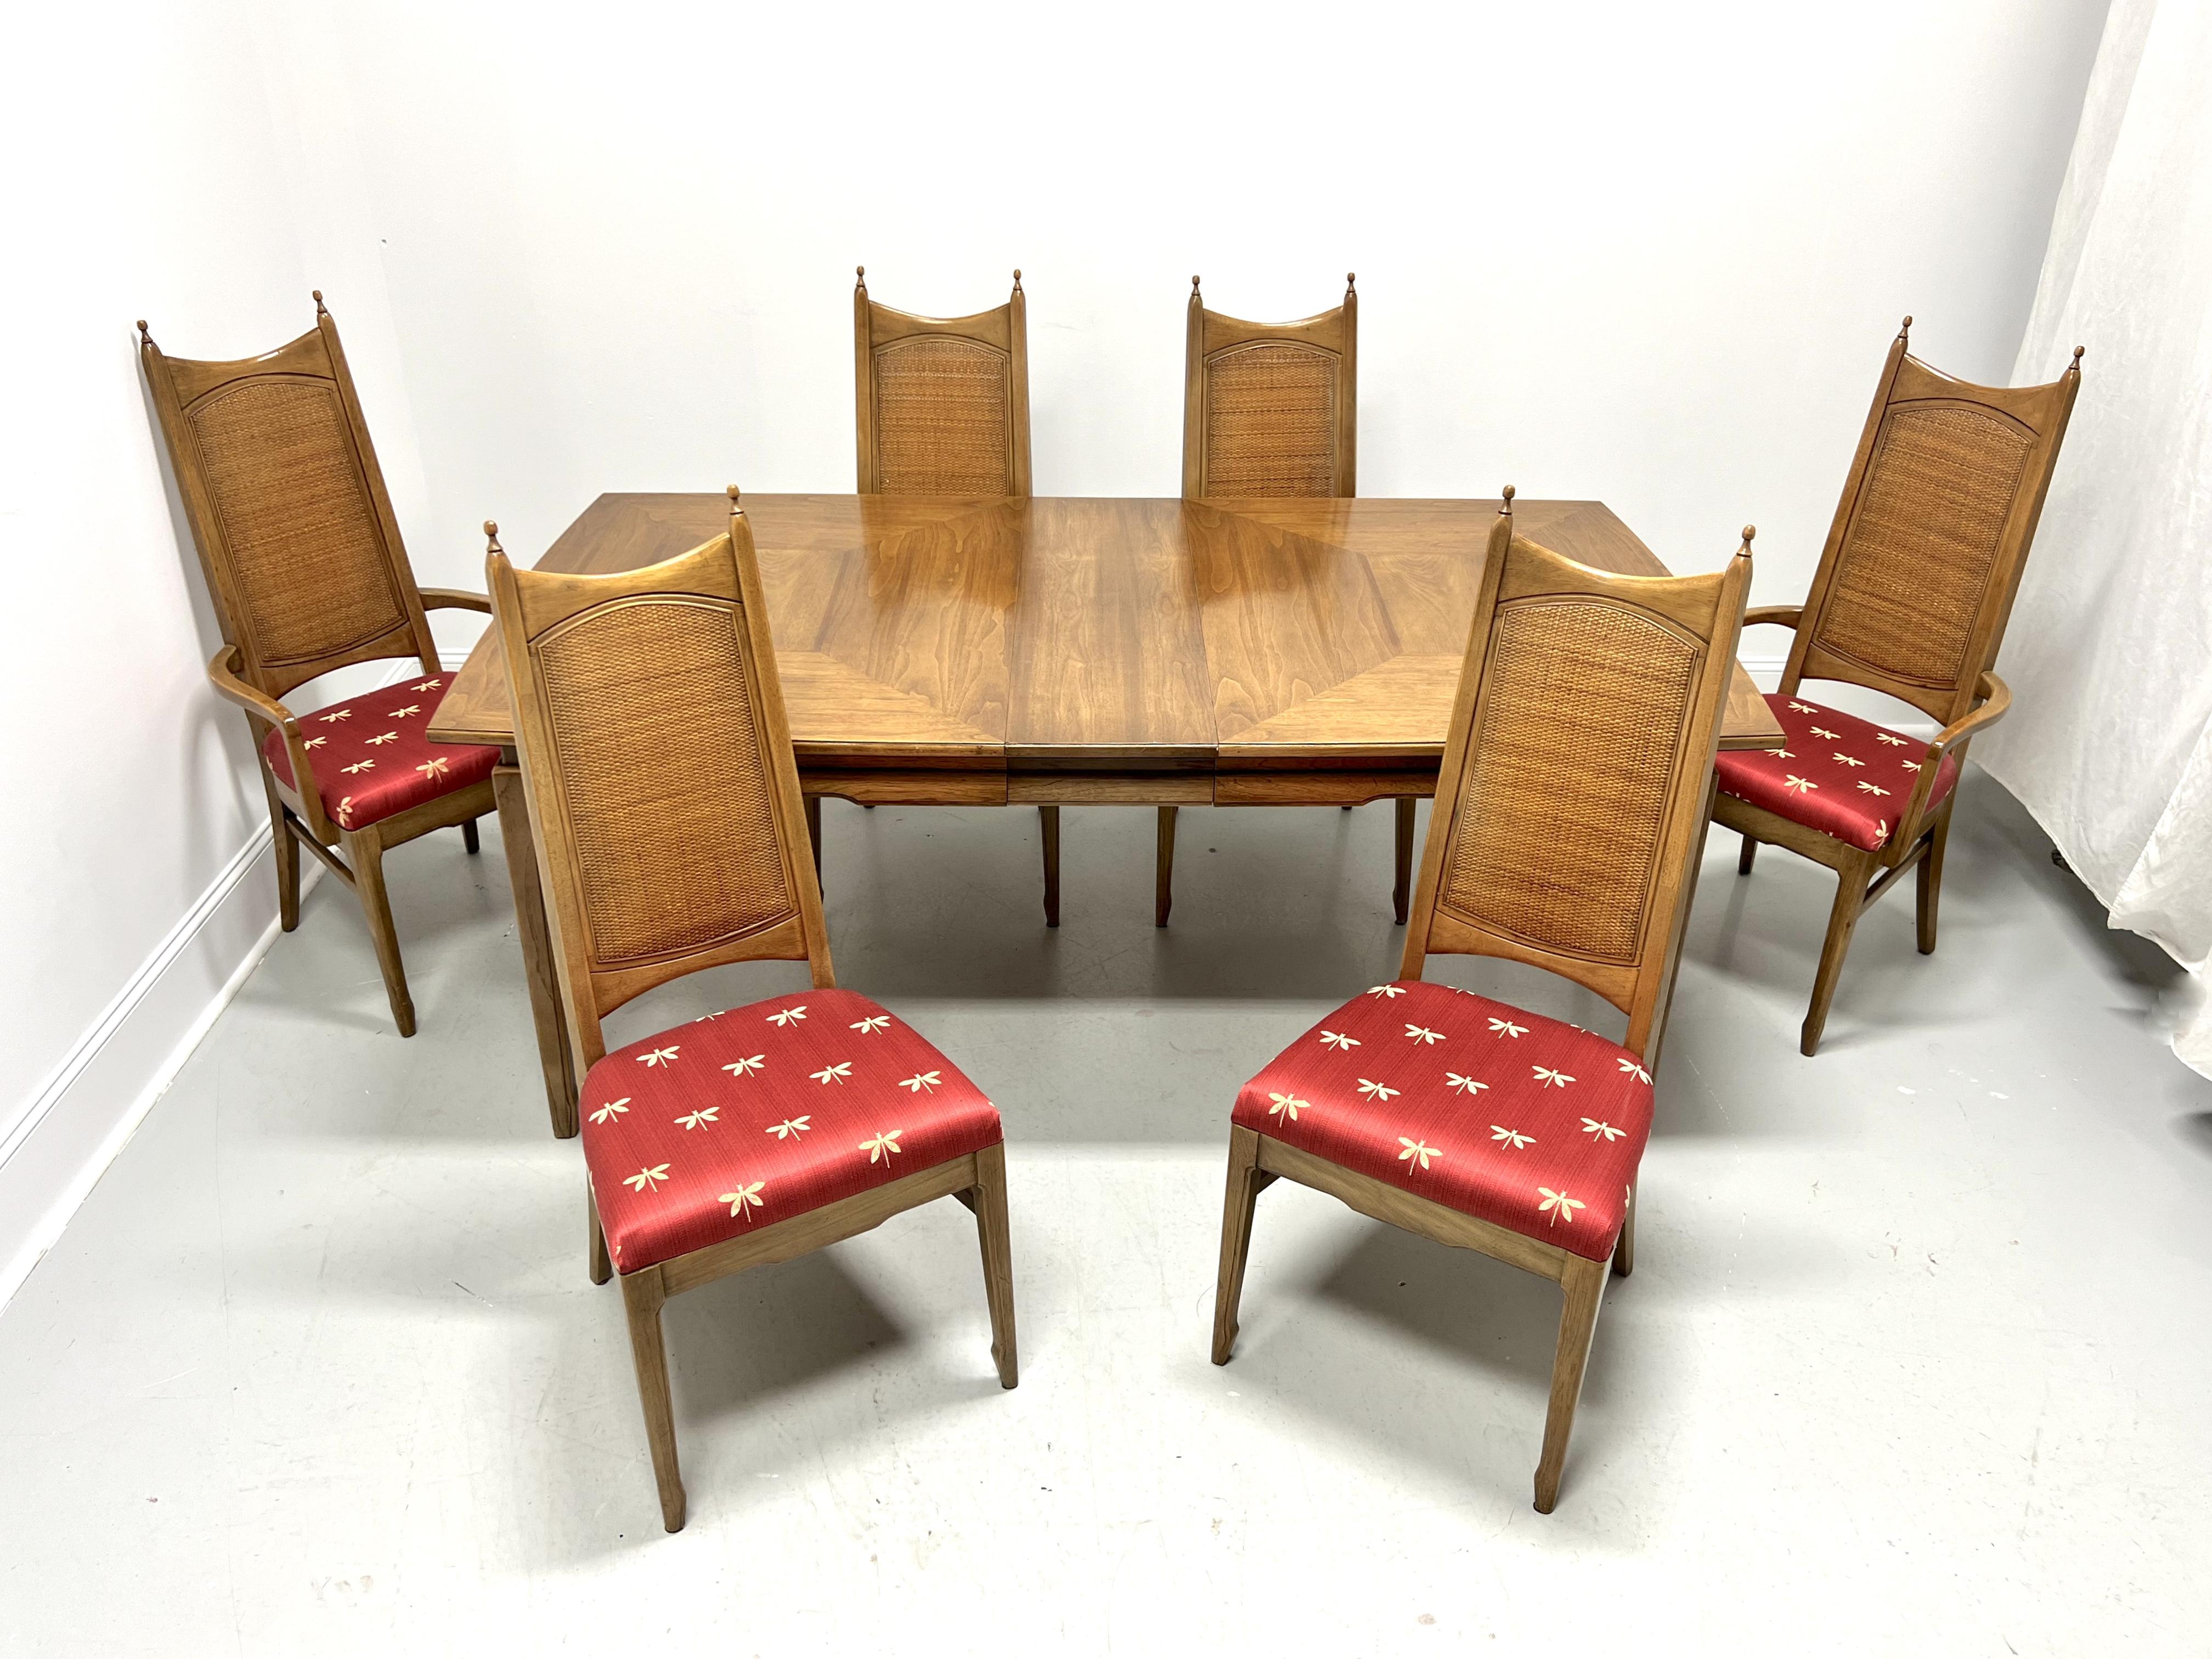 THOMASVILLE Pecan Mid 20th Century Modern MCM Dining Table Set with 6 Chairs For Sale 9